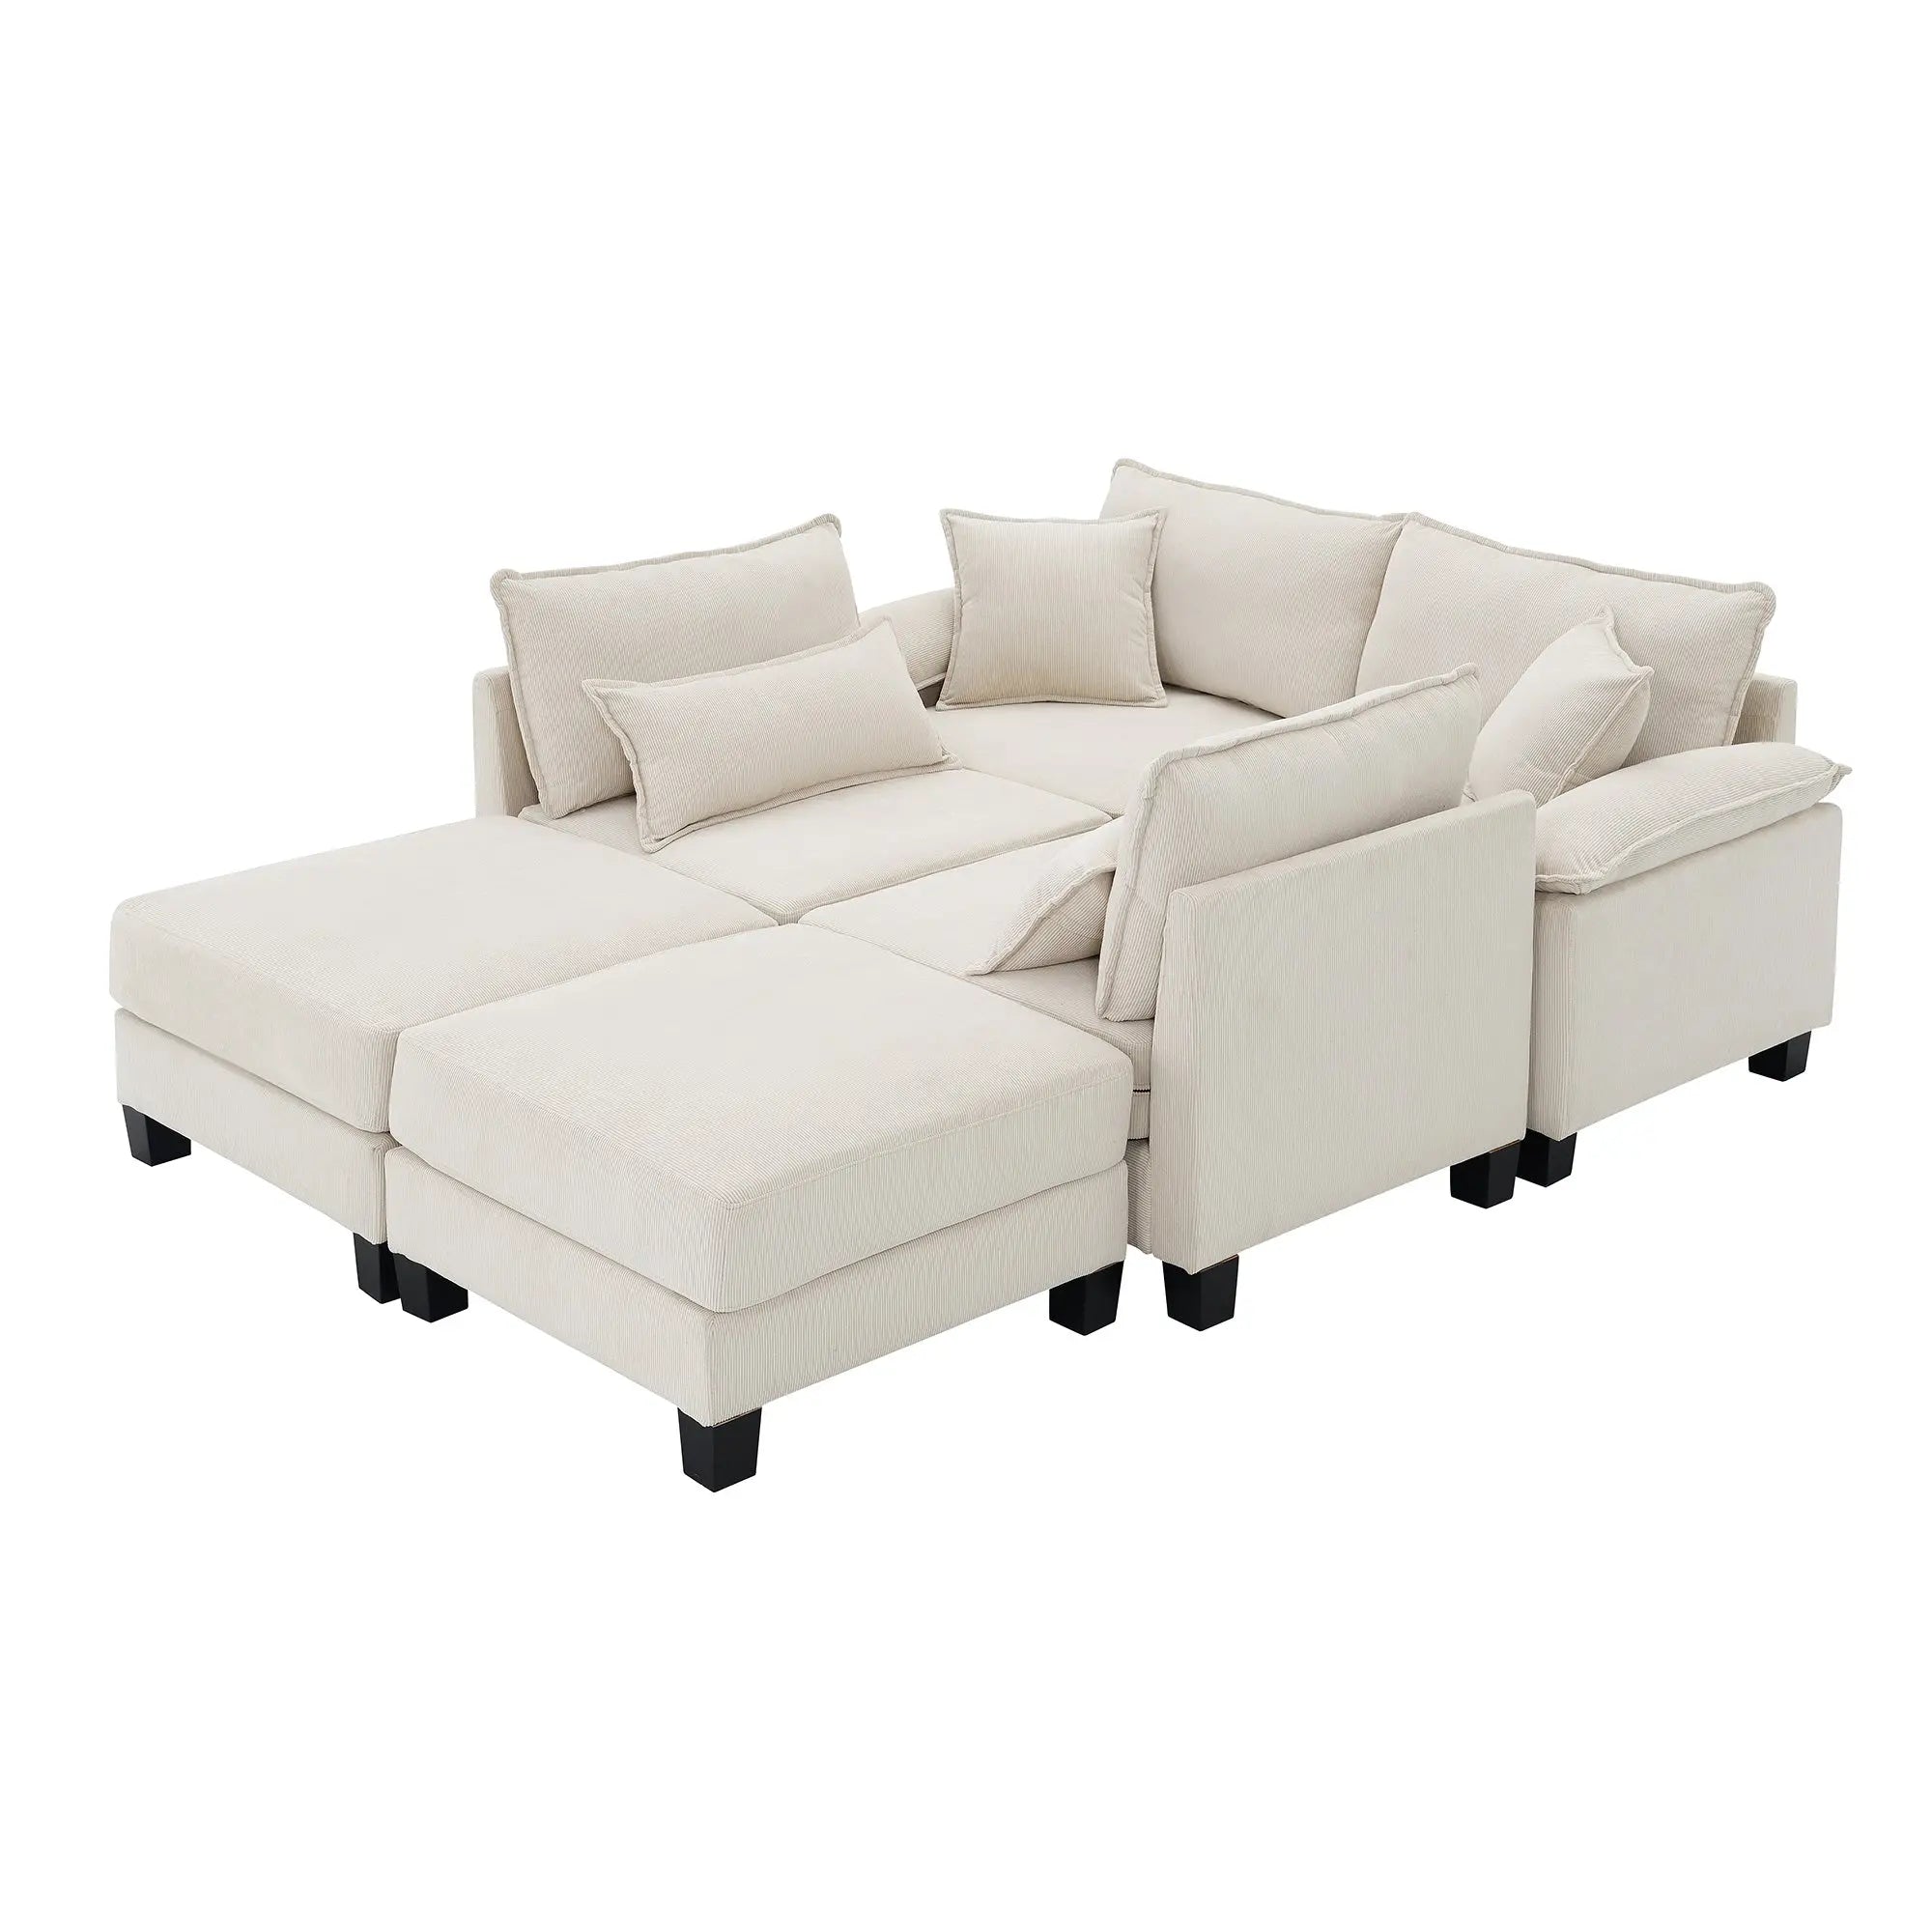 Bellemave 133" Corduroy Modular Sectional Sofa,U Shaped Couch with Armrest Bags,6 Seat Freely Combinable Sofa Bed Bellemave